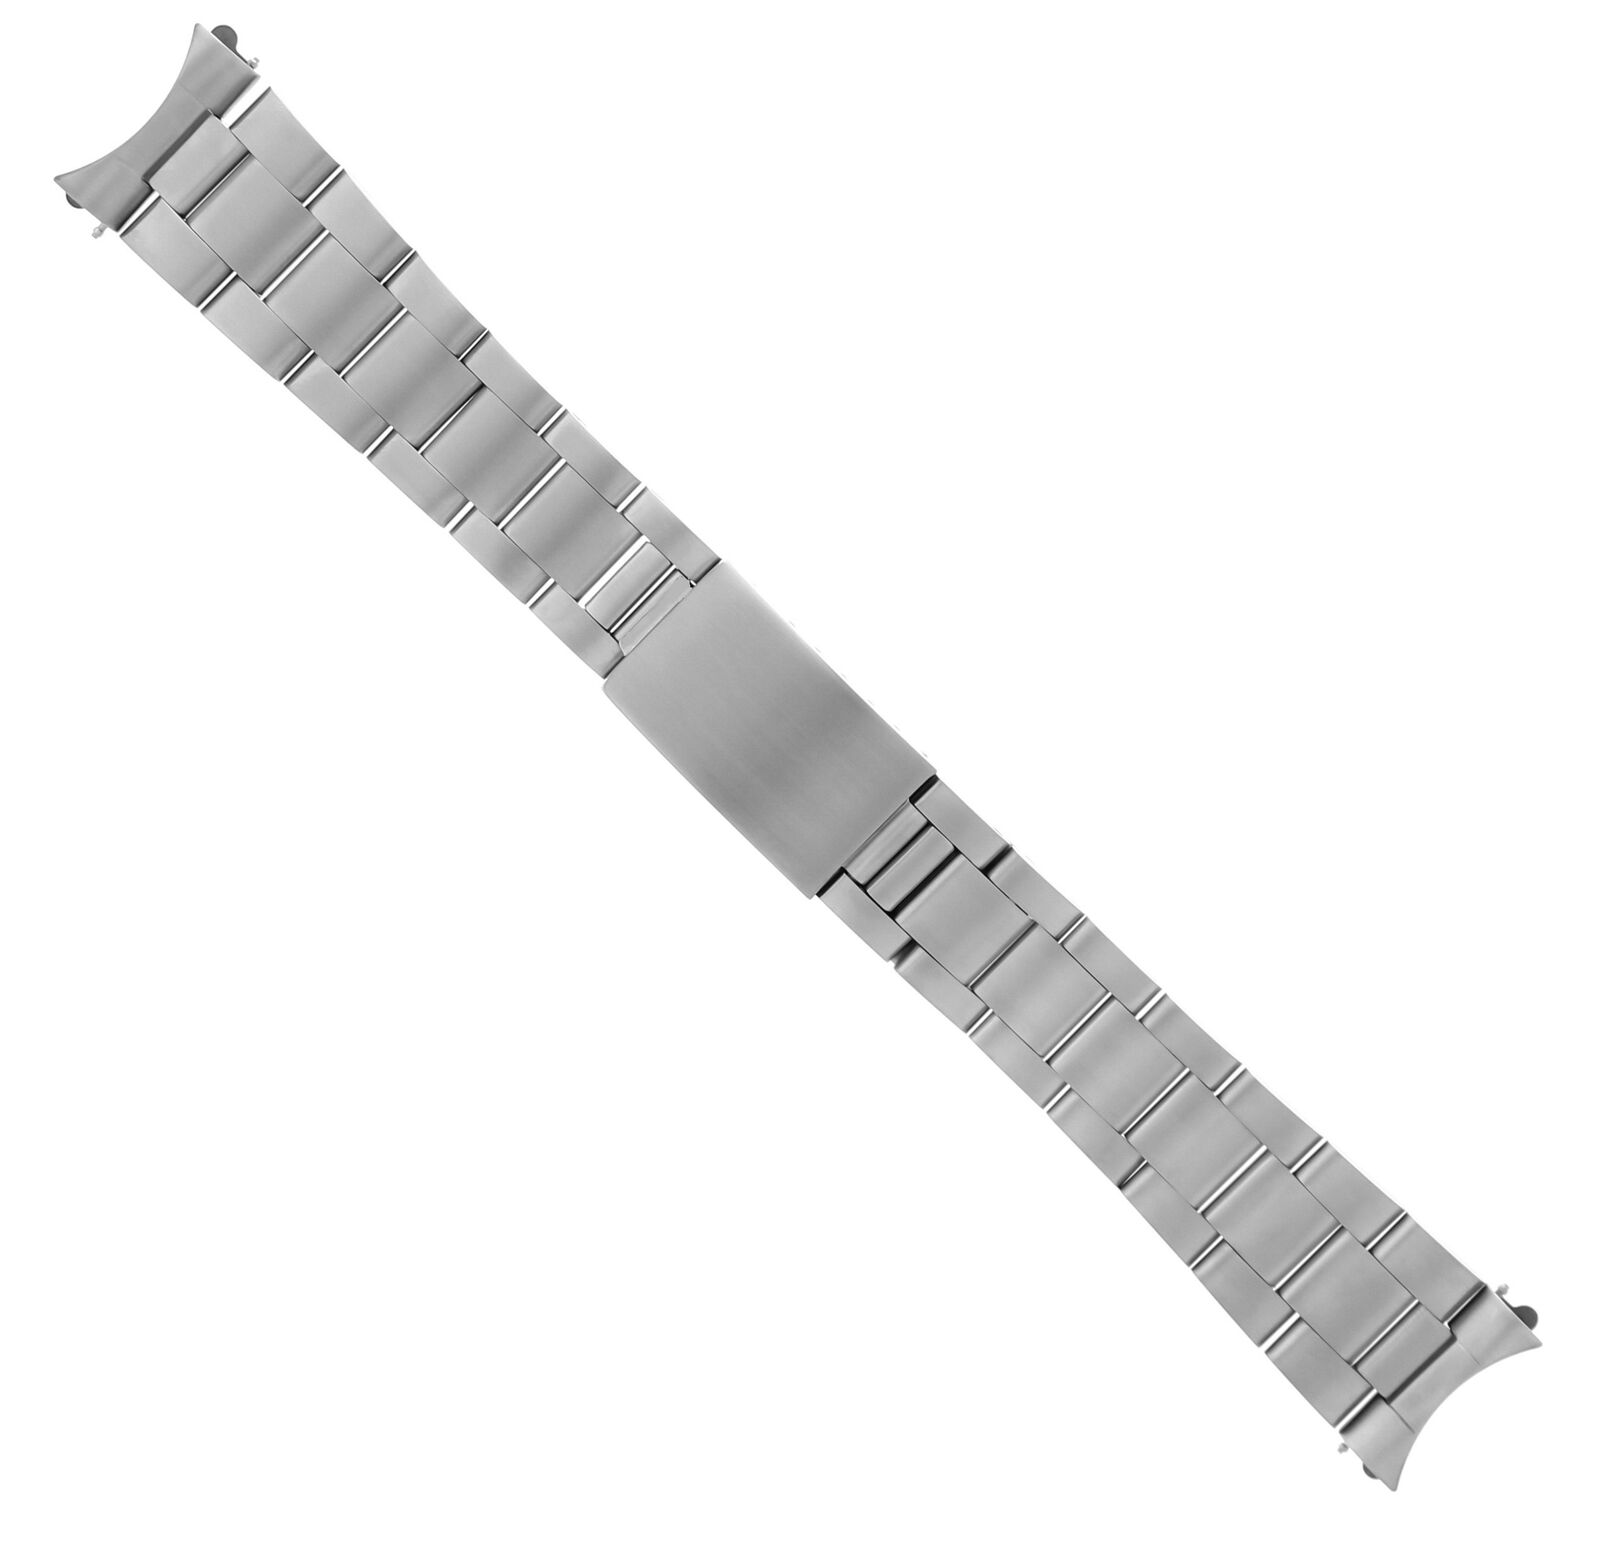 OYSTER WATCH BAND FOR ROLEX DATE DATEJUST 16013 16220 SOLID STAINLESS STEEL 20MM